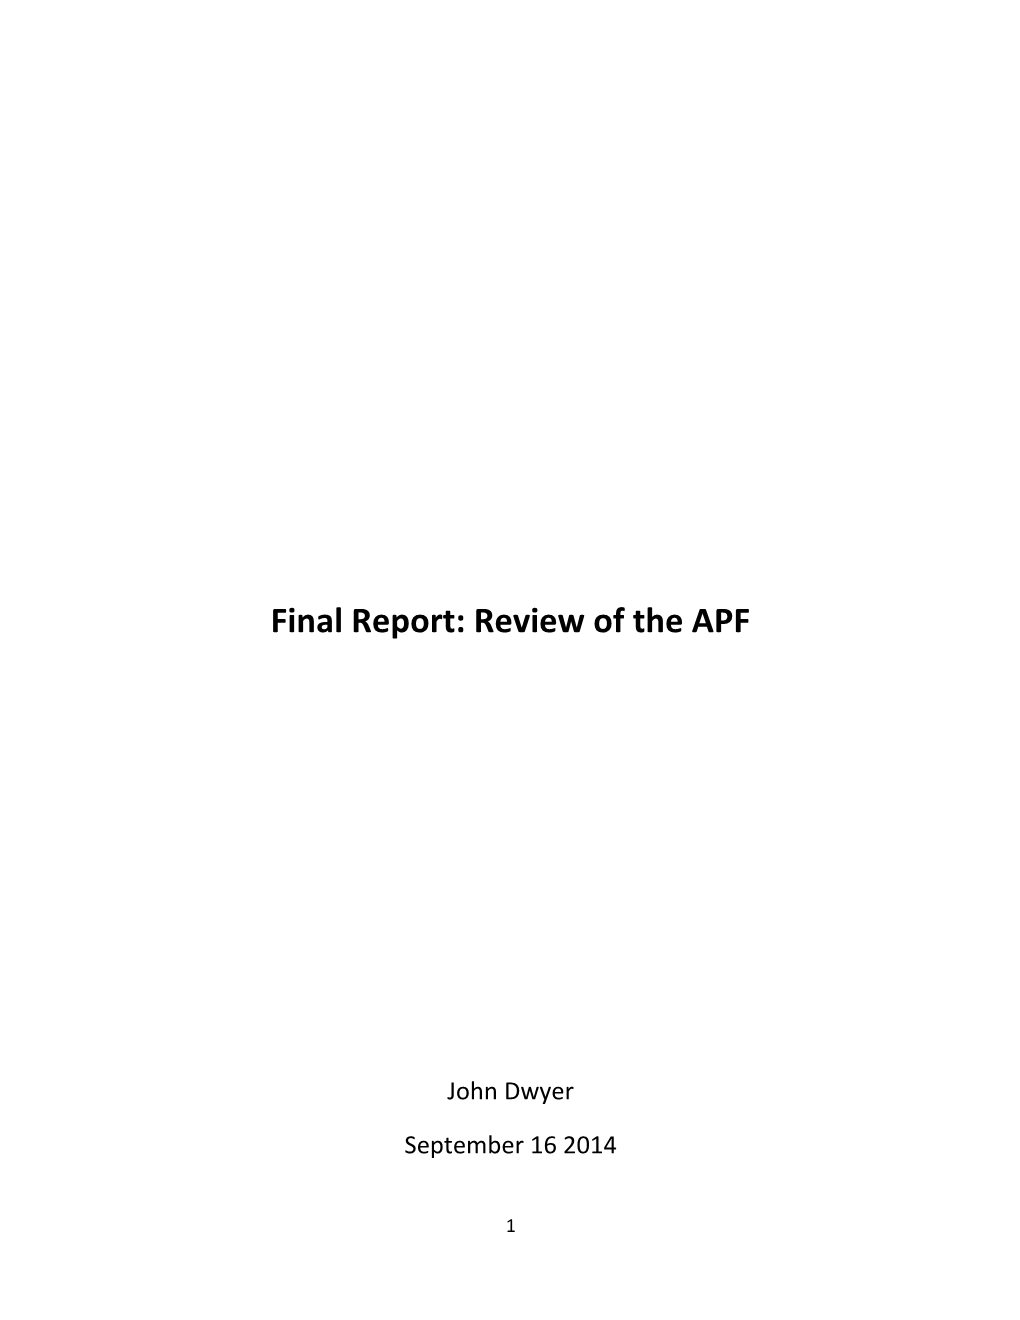 Final Report: Review of the APF